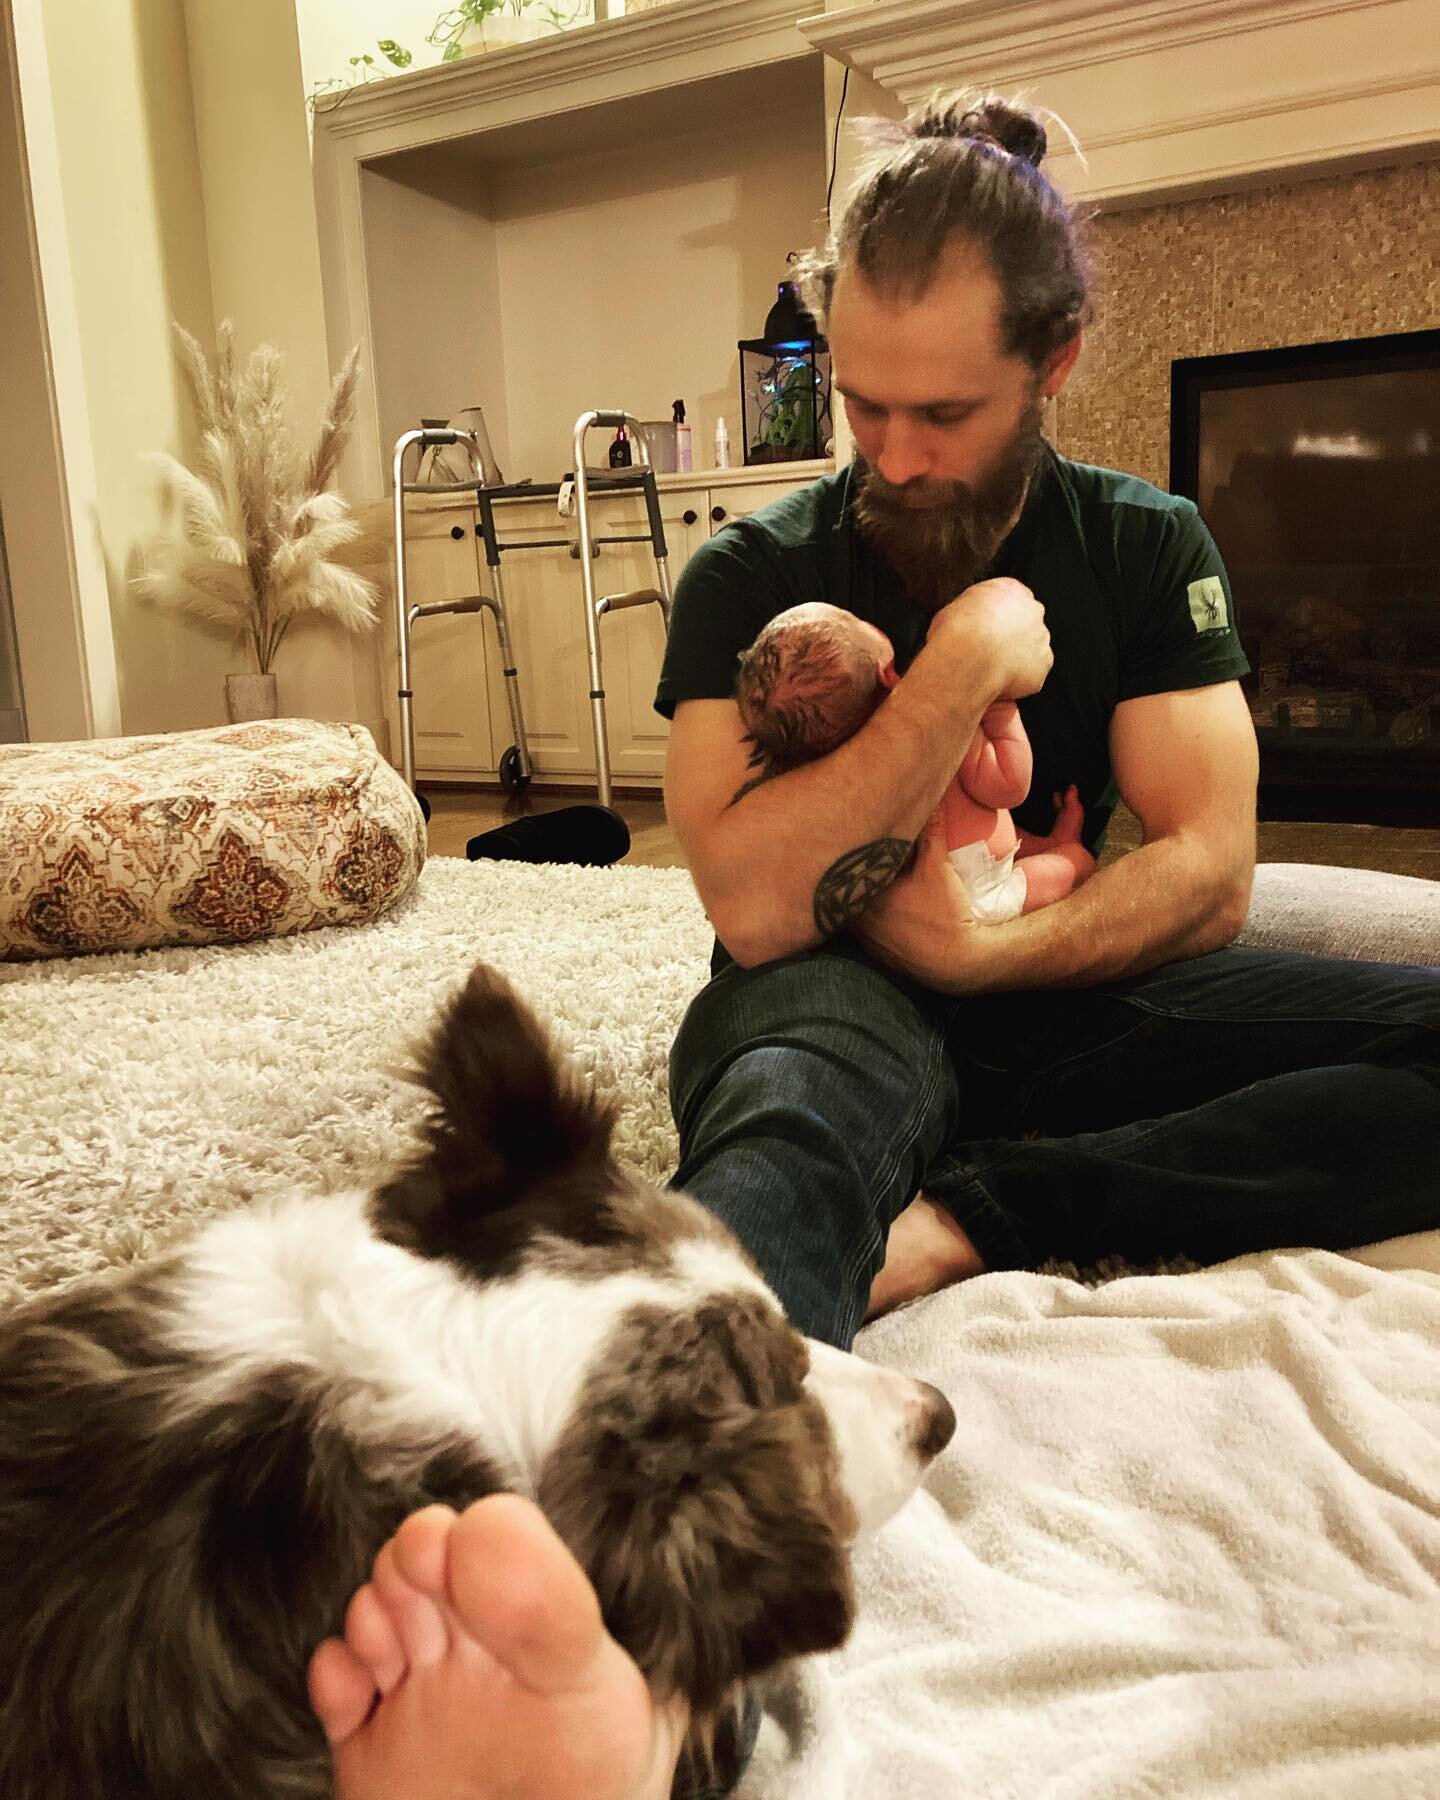 Proud new Papa and Daisy the Aussie, just soaking in the afterglow of a precipitous morning birth ❤️ Goodness, life is beautiful!
#petsofhomebirth